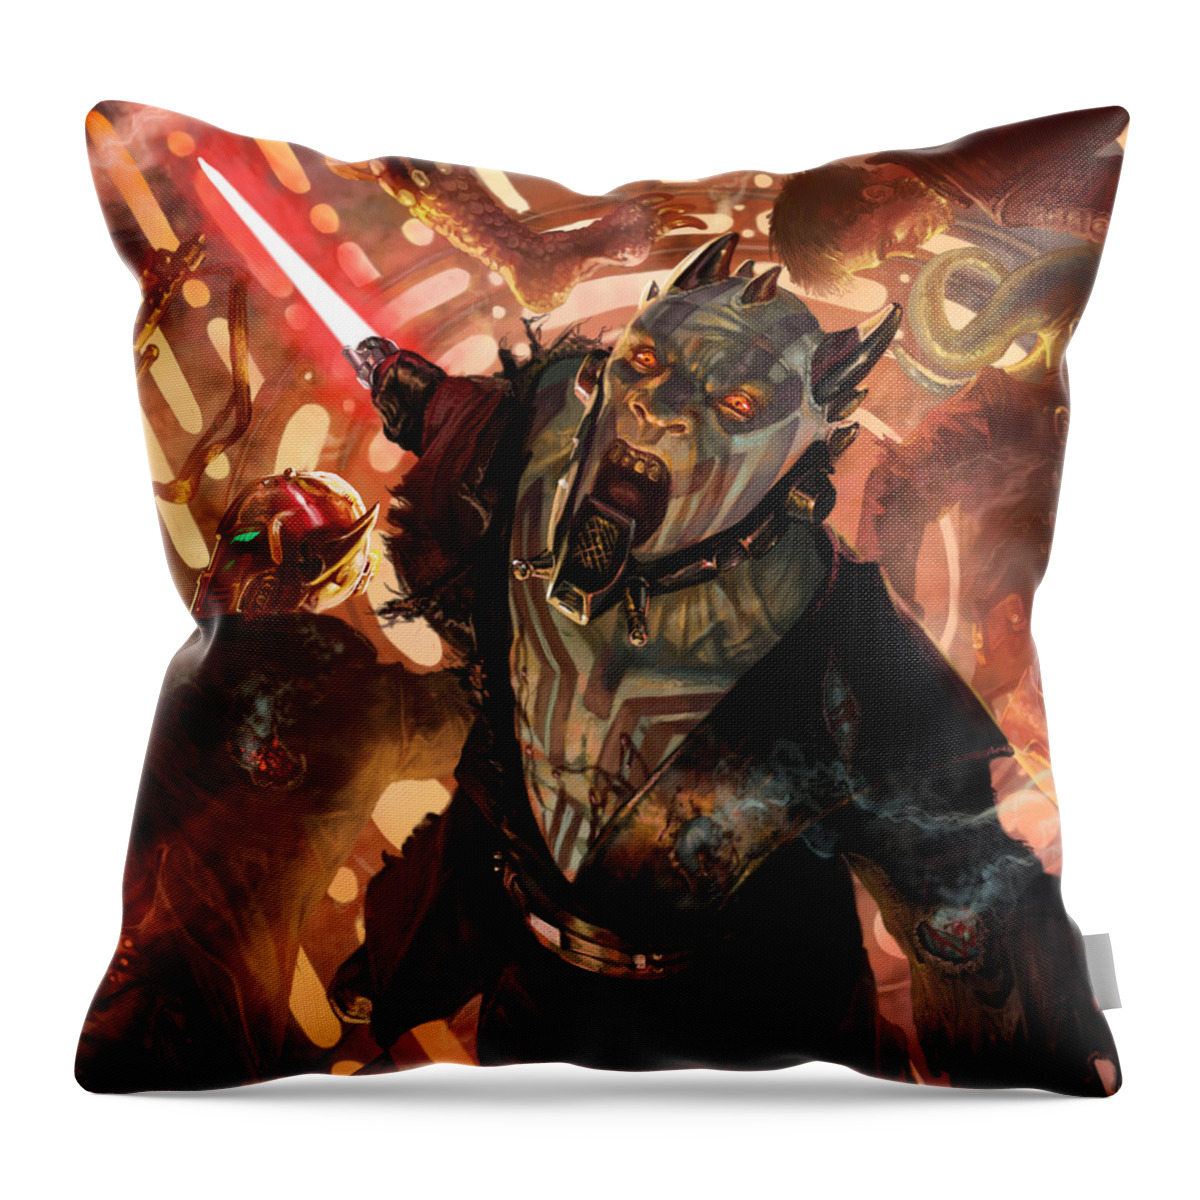 Star Wars Throw Pillow featuring the digital art Force Scream by Ryan Barger